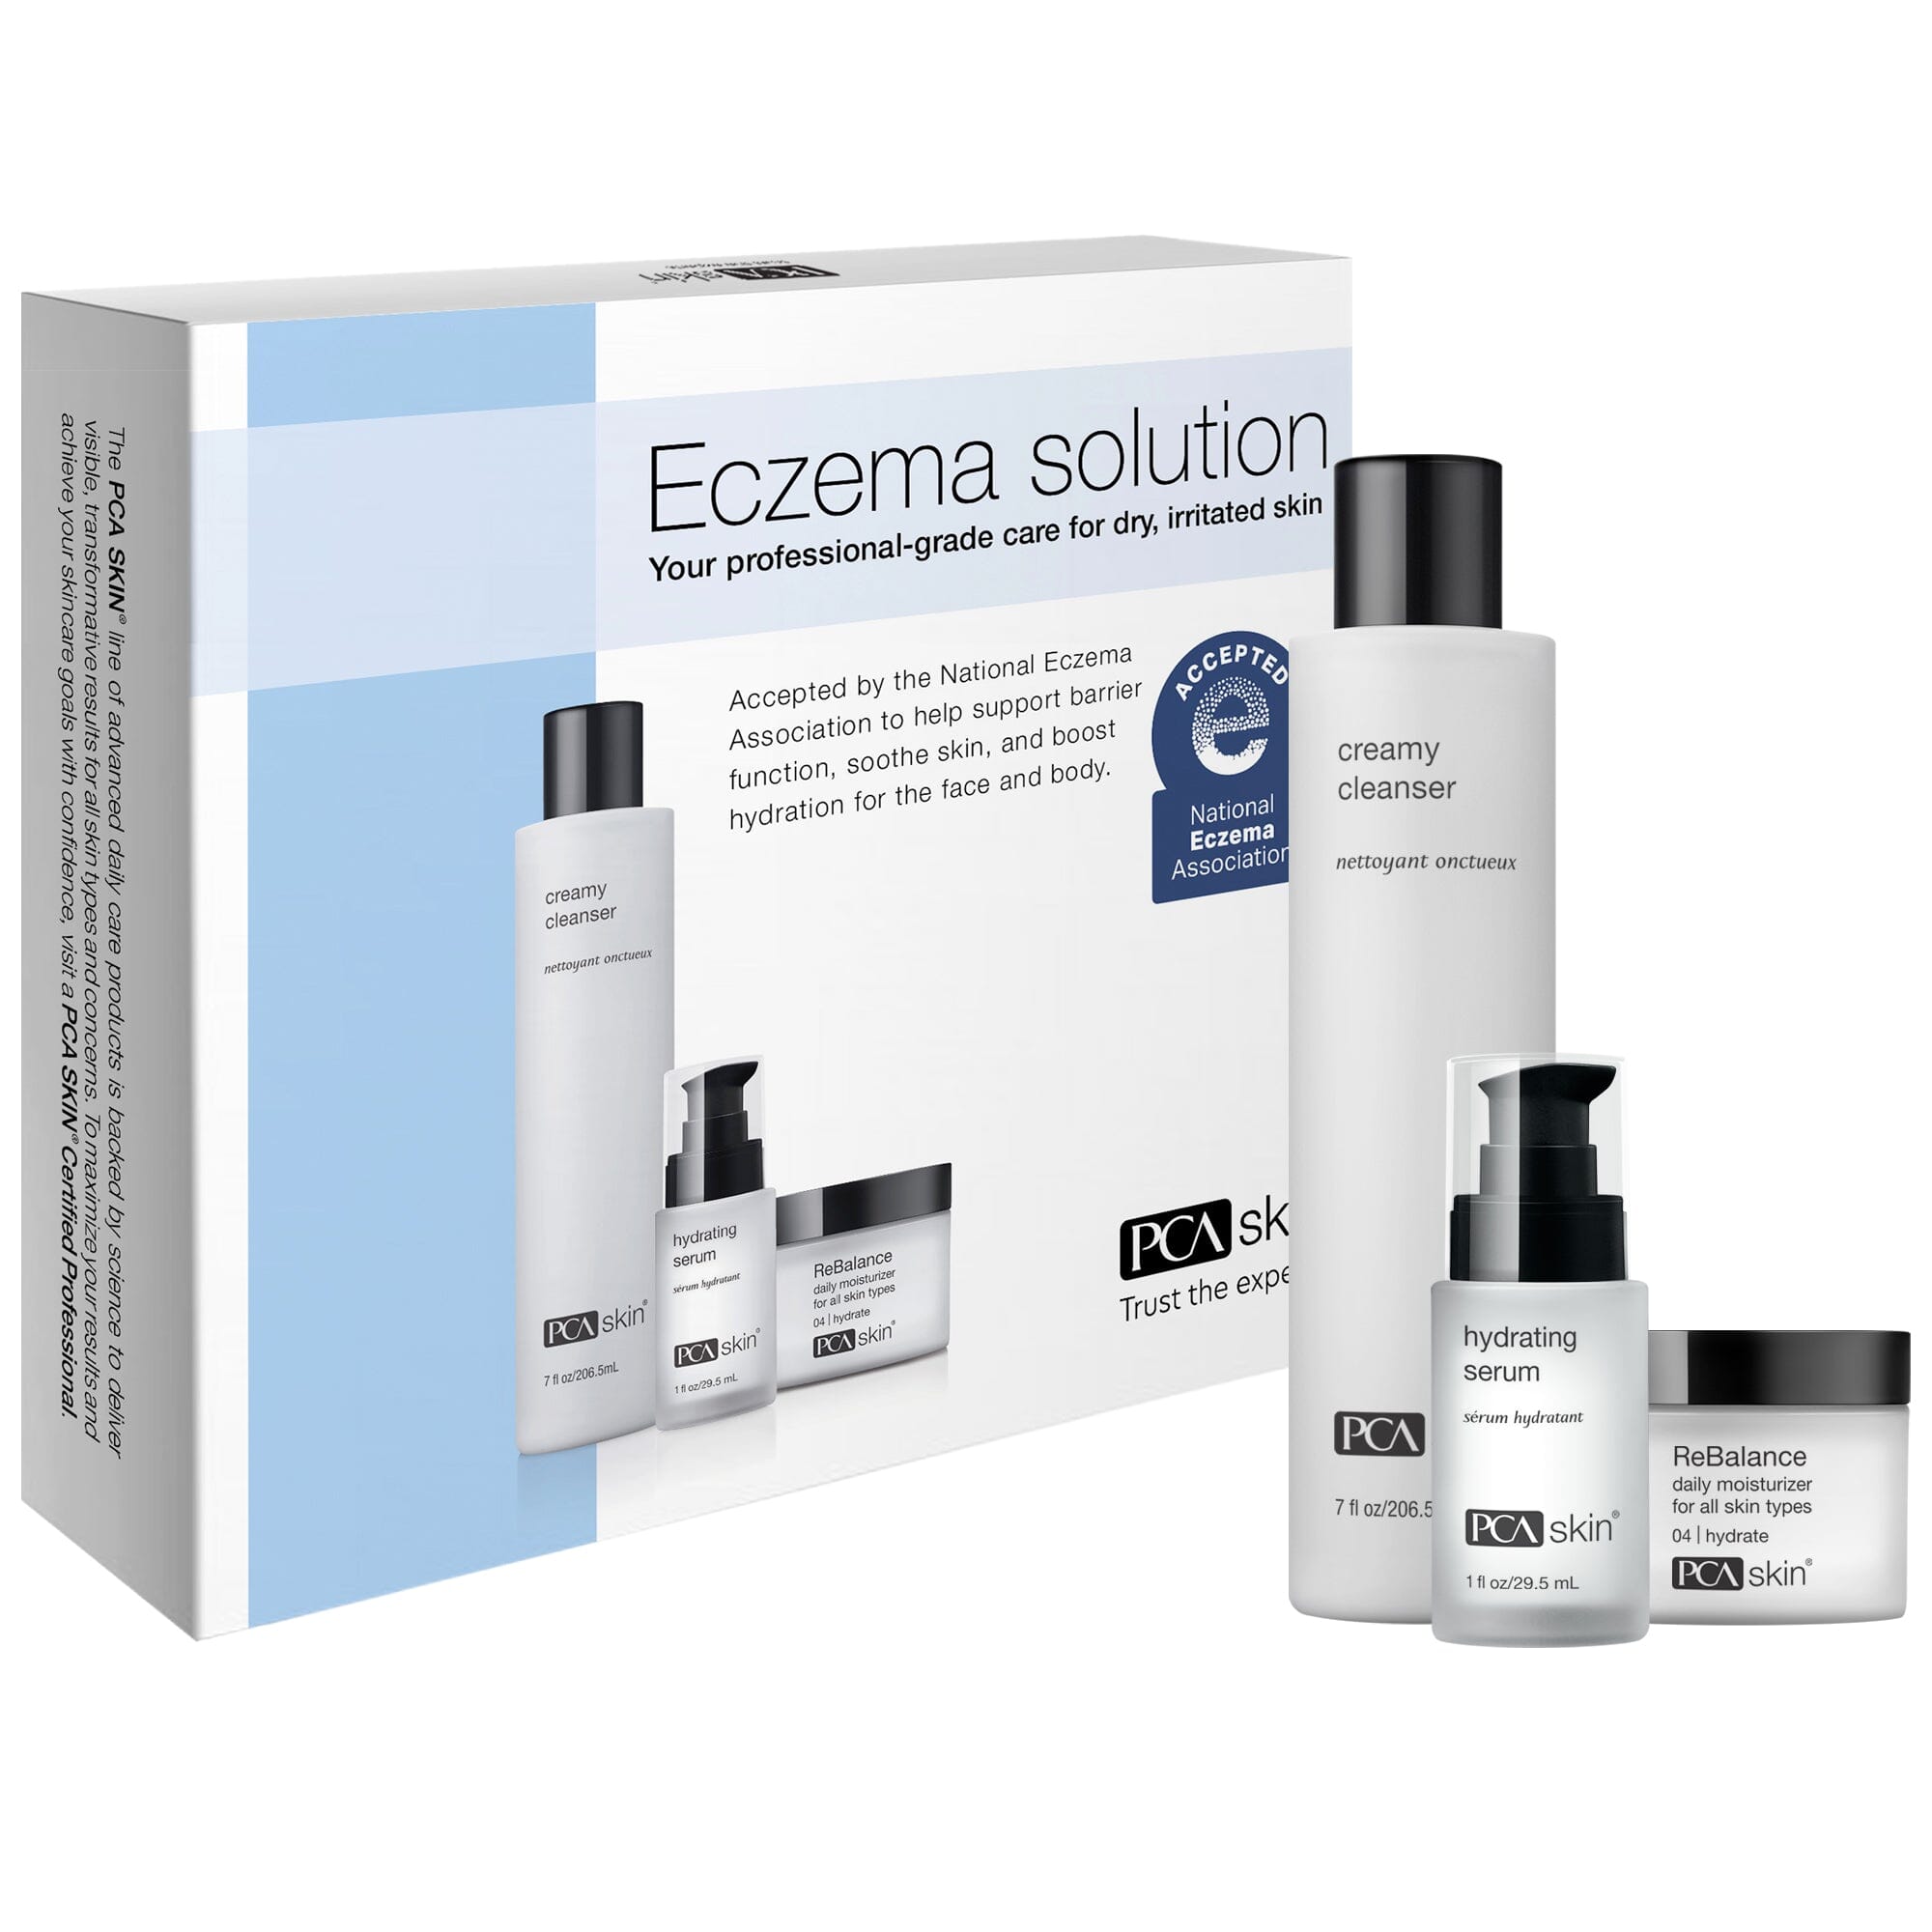 PCA Skin The Eczema Solution PCA Skin Shop at Exclusive Beauty Club